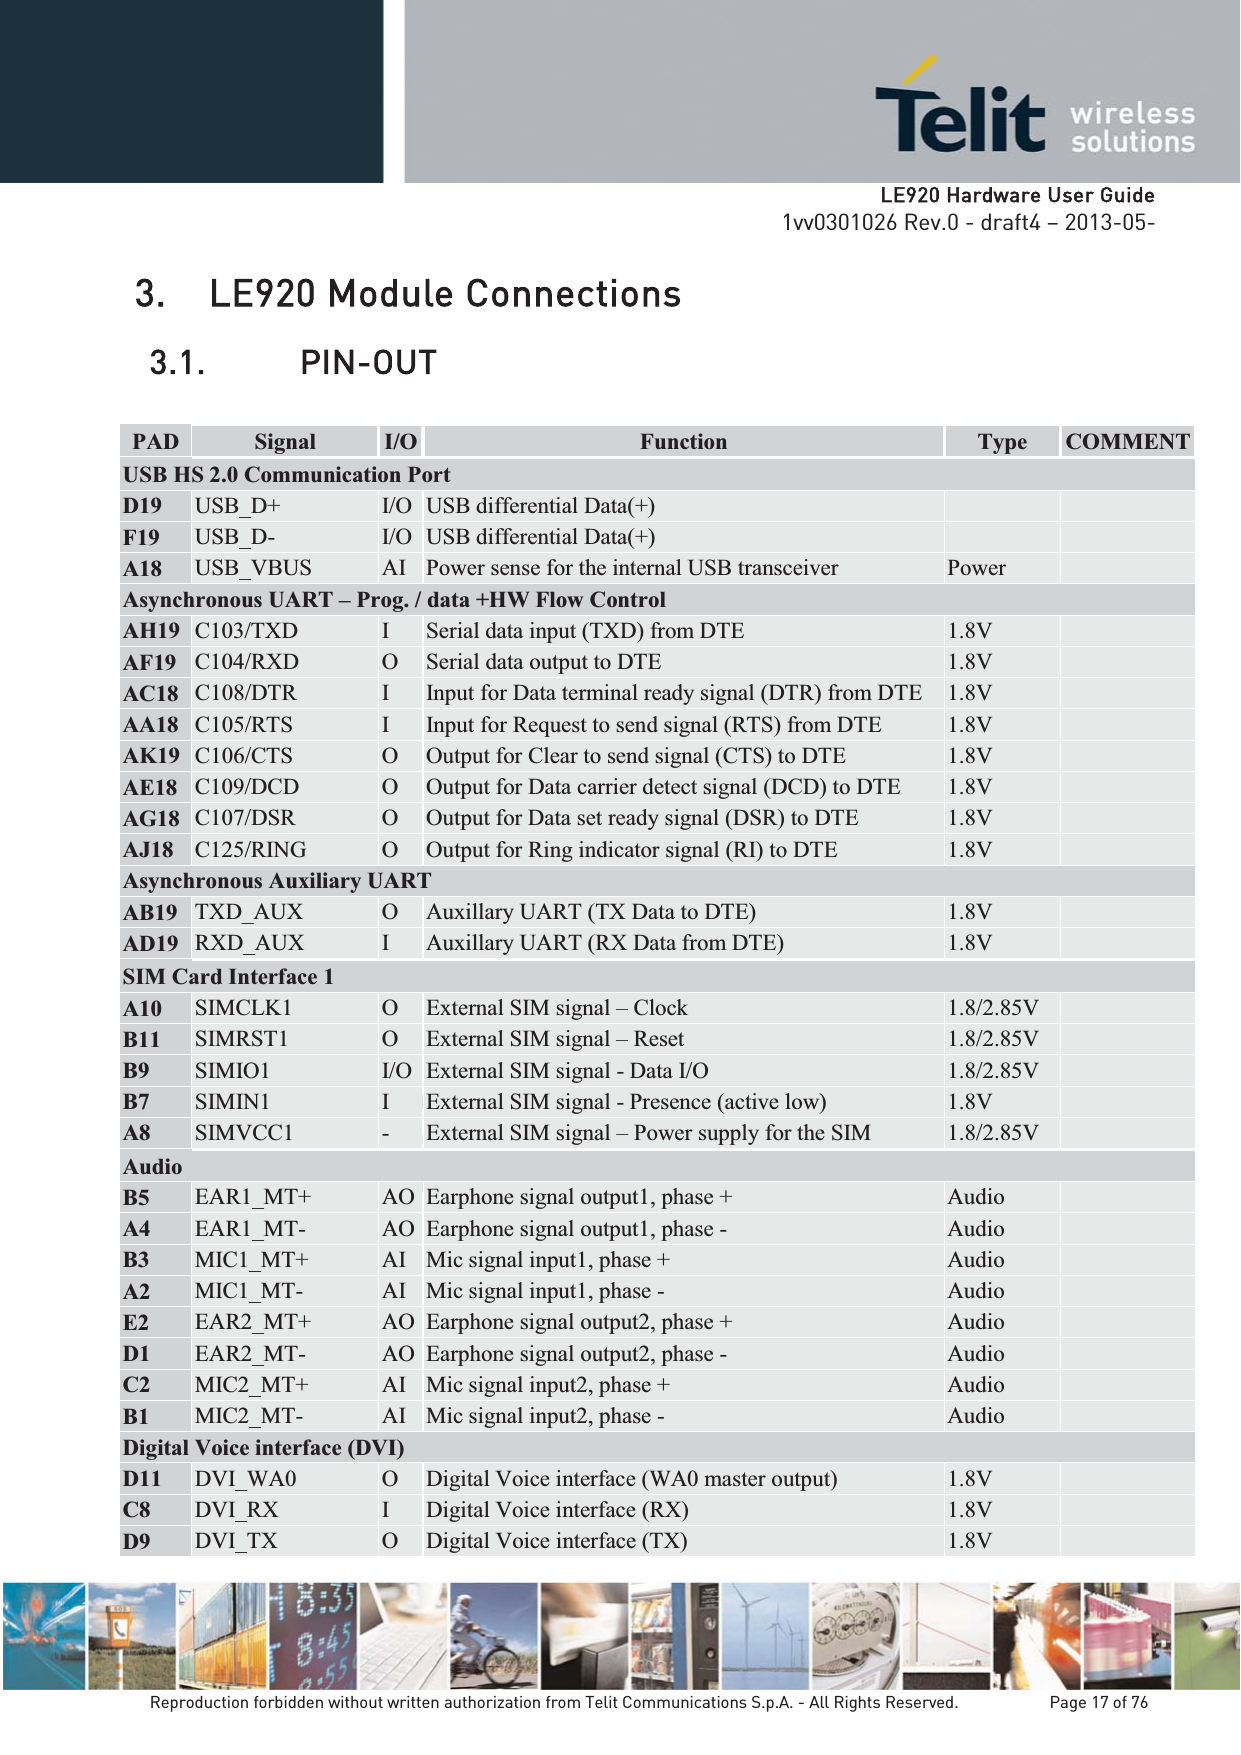   LLE920 Hardware User Guide1vv0301026 Rev.0 - draft4 – 2013-05-Reproduction forbidden without written authorization from Telit Communications S.p.A. - All Rights Reserved.    Page 17 of 76 3. LE920 Module Connections 3.1. PIN-OUT PAD  Signal  I/O  Function  Type  COMMENT USB HS 2.0 Communication Port D19  USB_D+  I/O USB differential Data(+)     F19  USB_D-  I/O USB differential Data(+)     A18  USB_VBUS  AI Power sense for the internal USB transceiver  Power  Asynchronous UART – Prog. / data +HW Flow Control AH19  C103/TXD  I  Serial data input (TXD) from DTE  1.8V   AF19  C104/RXD  O  Serial data output to DTE  1.8V   AC18  C108/DTR  I  Input for Data terminal ready signal (DTR) from DTE  1.8V   AA18  C105/RTS  I  Input for Request to send signal (RTS) from DTE  1.8V   AK19  C106/CTS  O  Output for Clear to send signal (CTS) to DTE  1.8V   AE18  C109/DCD  O  Output for Data carrier detect signal (DCD) to DTE  1.8V   AG18  C107/DSR  O  Output for Data set ready signal (DSR) to DTE  1.8V   AJ18  C125/RING  O  Output for Ring indicator signal (RI) to DTE  1.8V   Asynchronous Auxiliary UART AB19  TXD_AUX  O  Auxillary UART (TX Data to DTE)  1.8V   AD19  RXD_AUX  I  Auxillary UART (RX Data from DTE)  1.8V   SIM Card Interface 1 A10  SIMCLK1  O  External SIM signal – Clock  1.8/2.85V   B11  SIMRST1  O  External SIM signal – Reset  1.8/2.85V   B9  SIMIO1  I/O External SIM signal - Data I/O  1.8/2.85V   B7  SIMIN1  I  External SIM signal - Presence (active low)  1.8V   A8  SIMVCC1  -  External SIM signal – Power supply for the SIM  1.8/2.85V   Audio B5  EAR1_MT+  AO  Earphone signal output1, phase +  Audio   A4  EAR1_MT-  AO  Earphone signal output1, phase -  Audio   B3  MIC1_MT+  AI Mic signal input1, phase +  Audio   A2  MIC1_MT-  AI Mic signal input1, phase -  Audio   E2  EAR2_MT+  AO  Earphone signal output2, phase +  Audio   D1  EAR2_MT-  AO  Earphone signal output2, phase -  Audio   C2  MIC2_MT+  AI Mic signal input2, phase +  Audio   B1  MIC2_MT-  AI Mic signal input2, phase -  Audio   Digital Voice interface (DVI) D11  DVI_WA0  O  Digital Voice interface (WA0 master output)  1.8V   C8  DVI_RX  I  Digital Voice interface (RX)  1.8V   D9  DVI_TX  O  Digital Voice interface (TX)  1.8V   